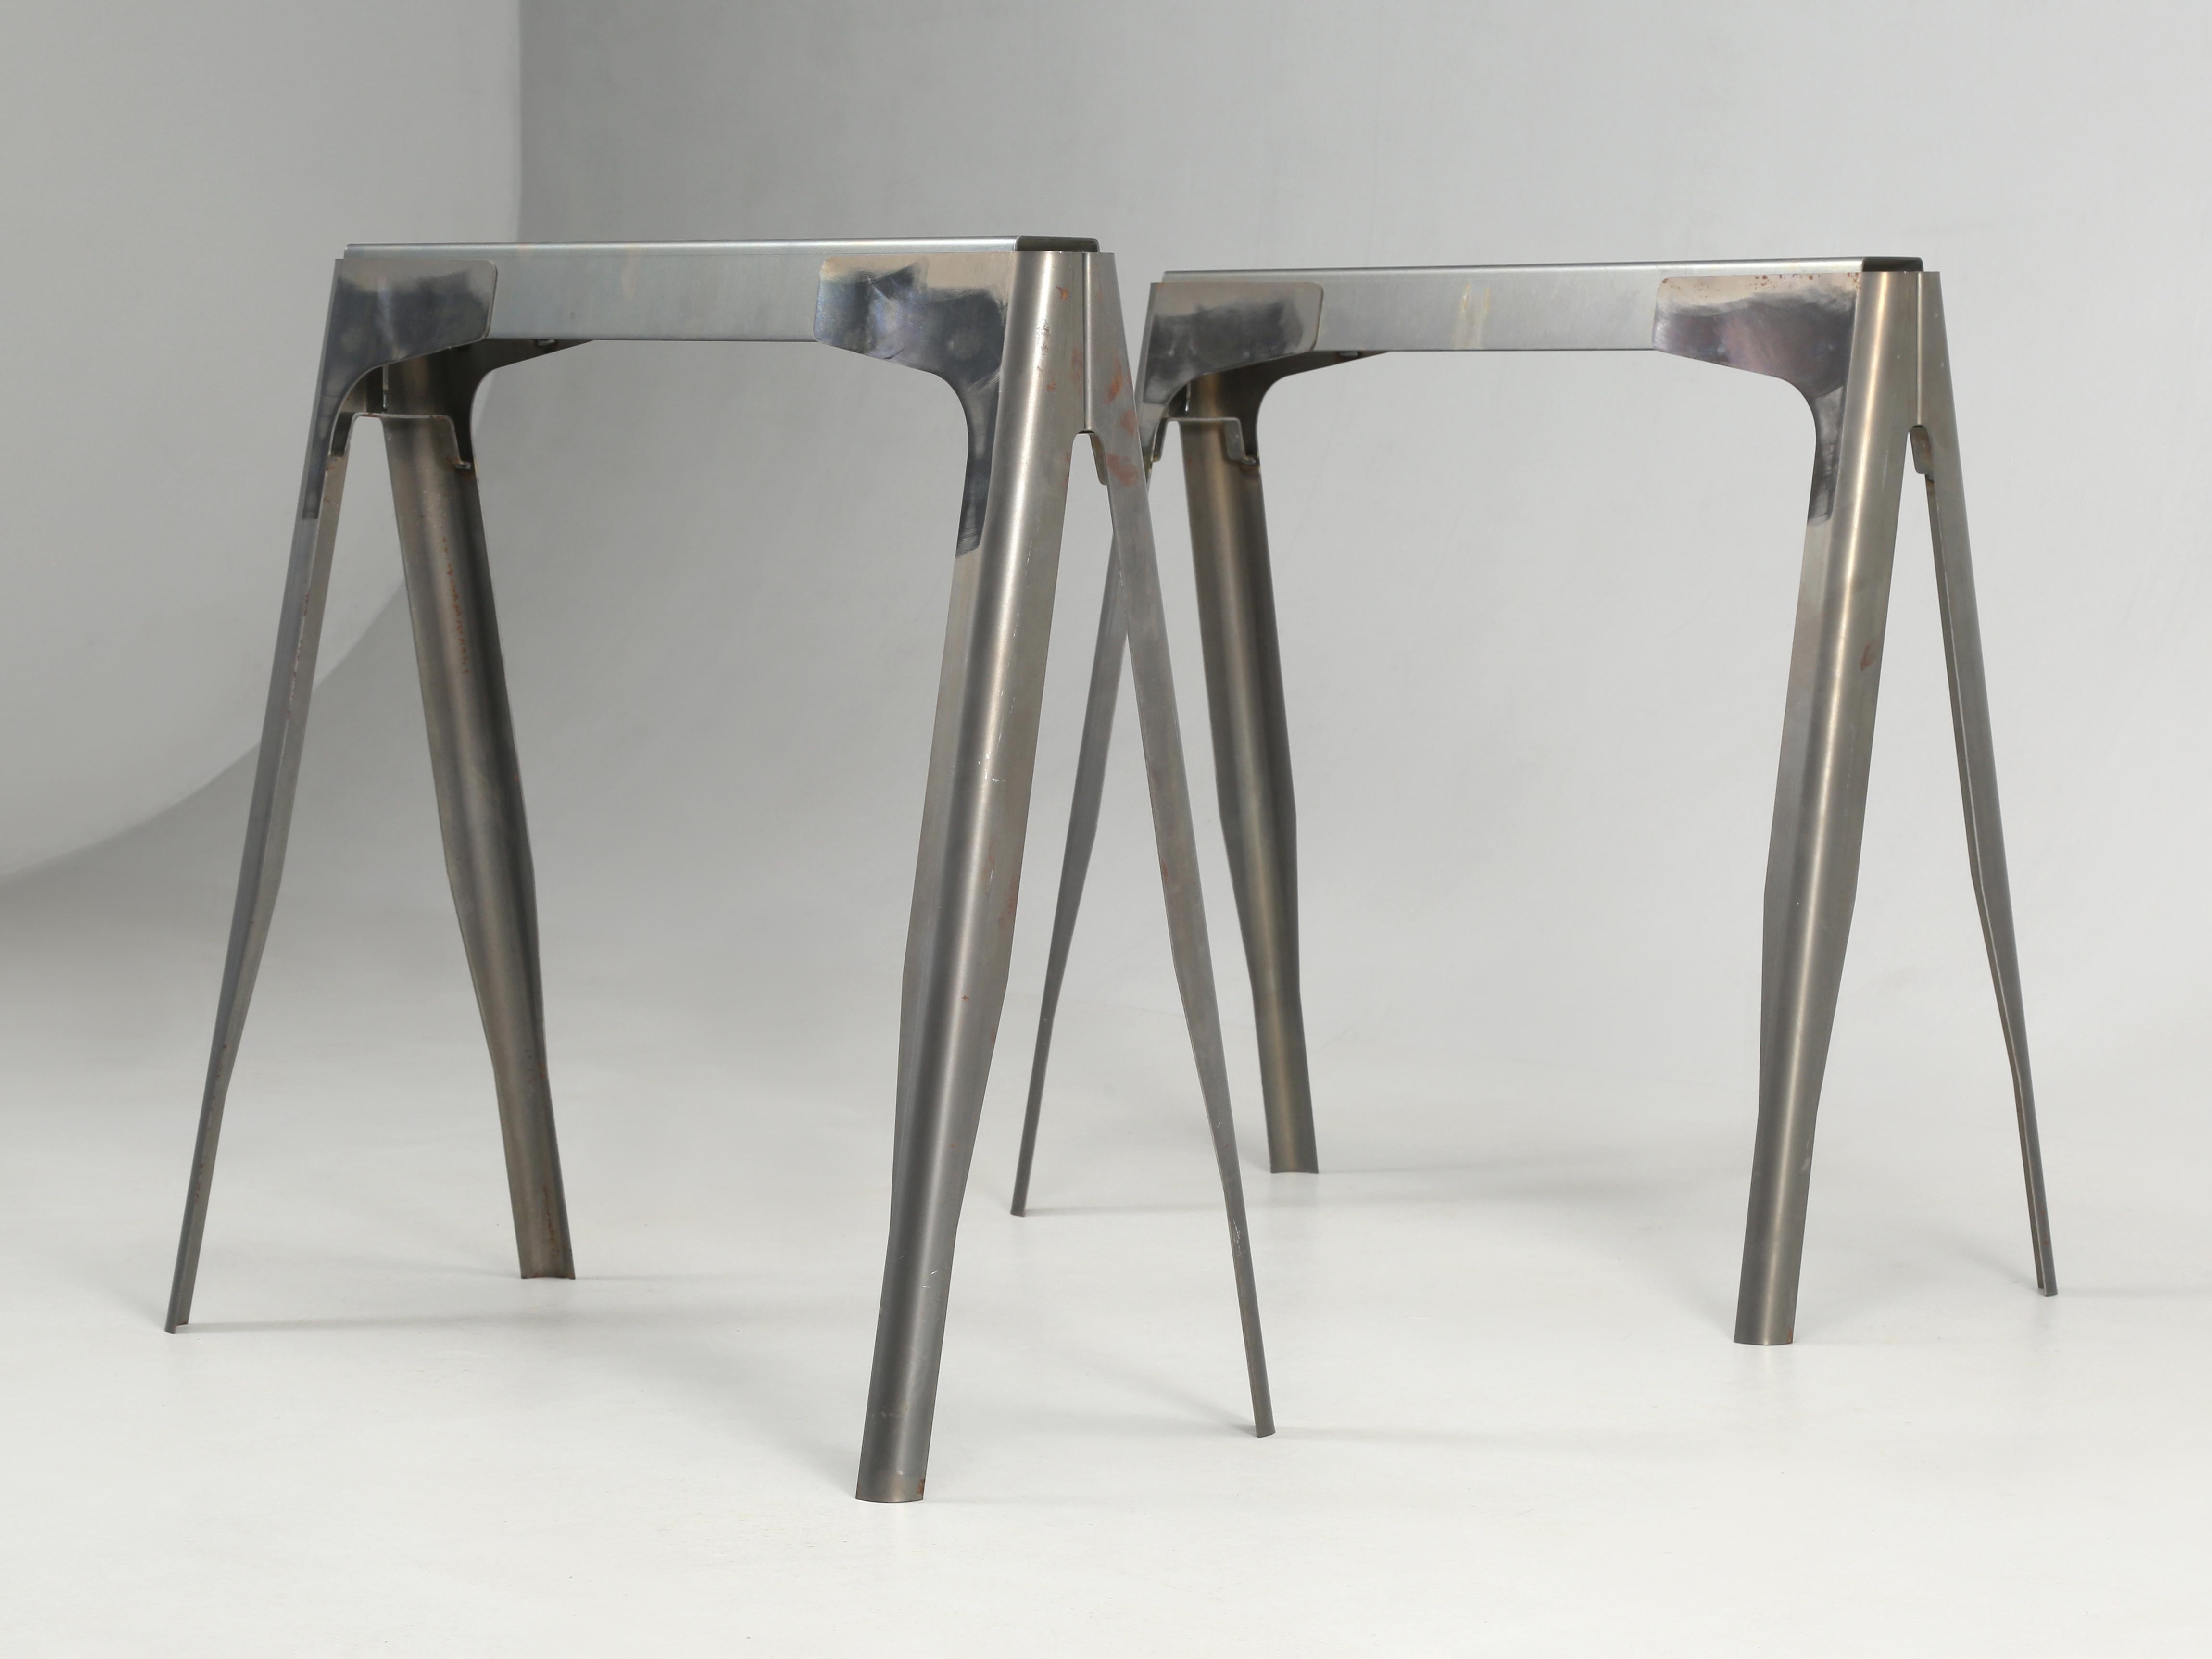 Genuine made in France Tolix steel trestle table legs. The Tolix trestle table legs are available in raw steel and can be painted in any color. We have at this time, roughly a half-dozen pairs available, along with (1500) additional pieces of